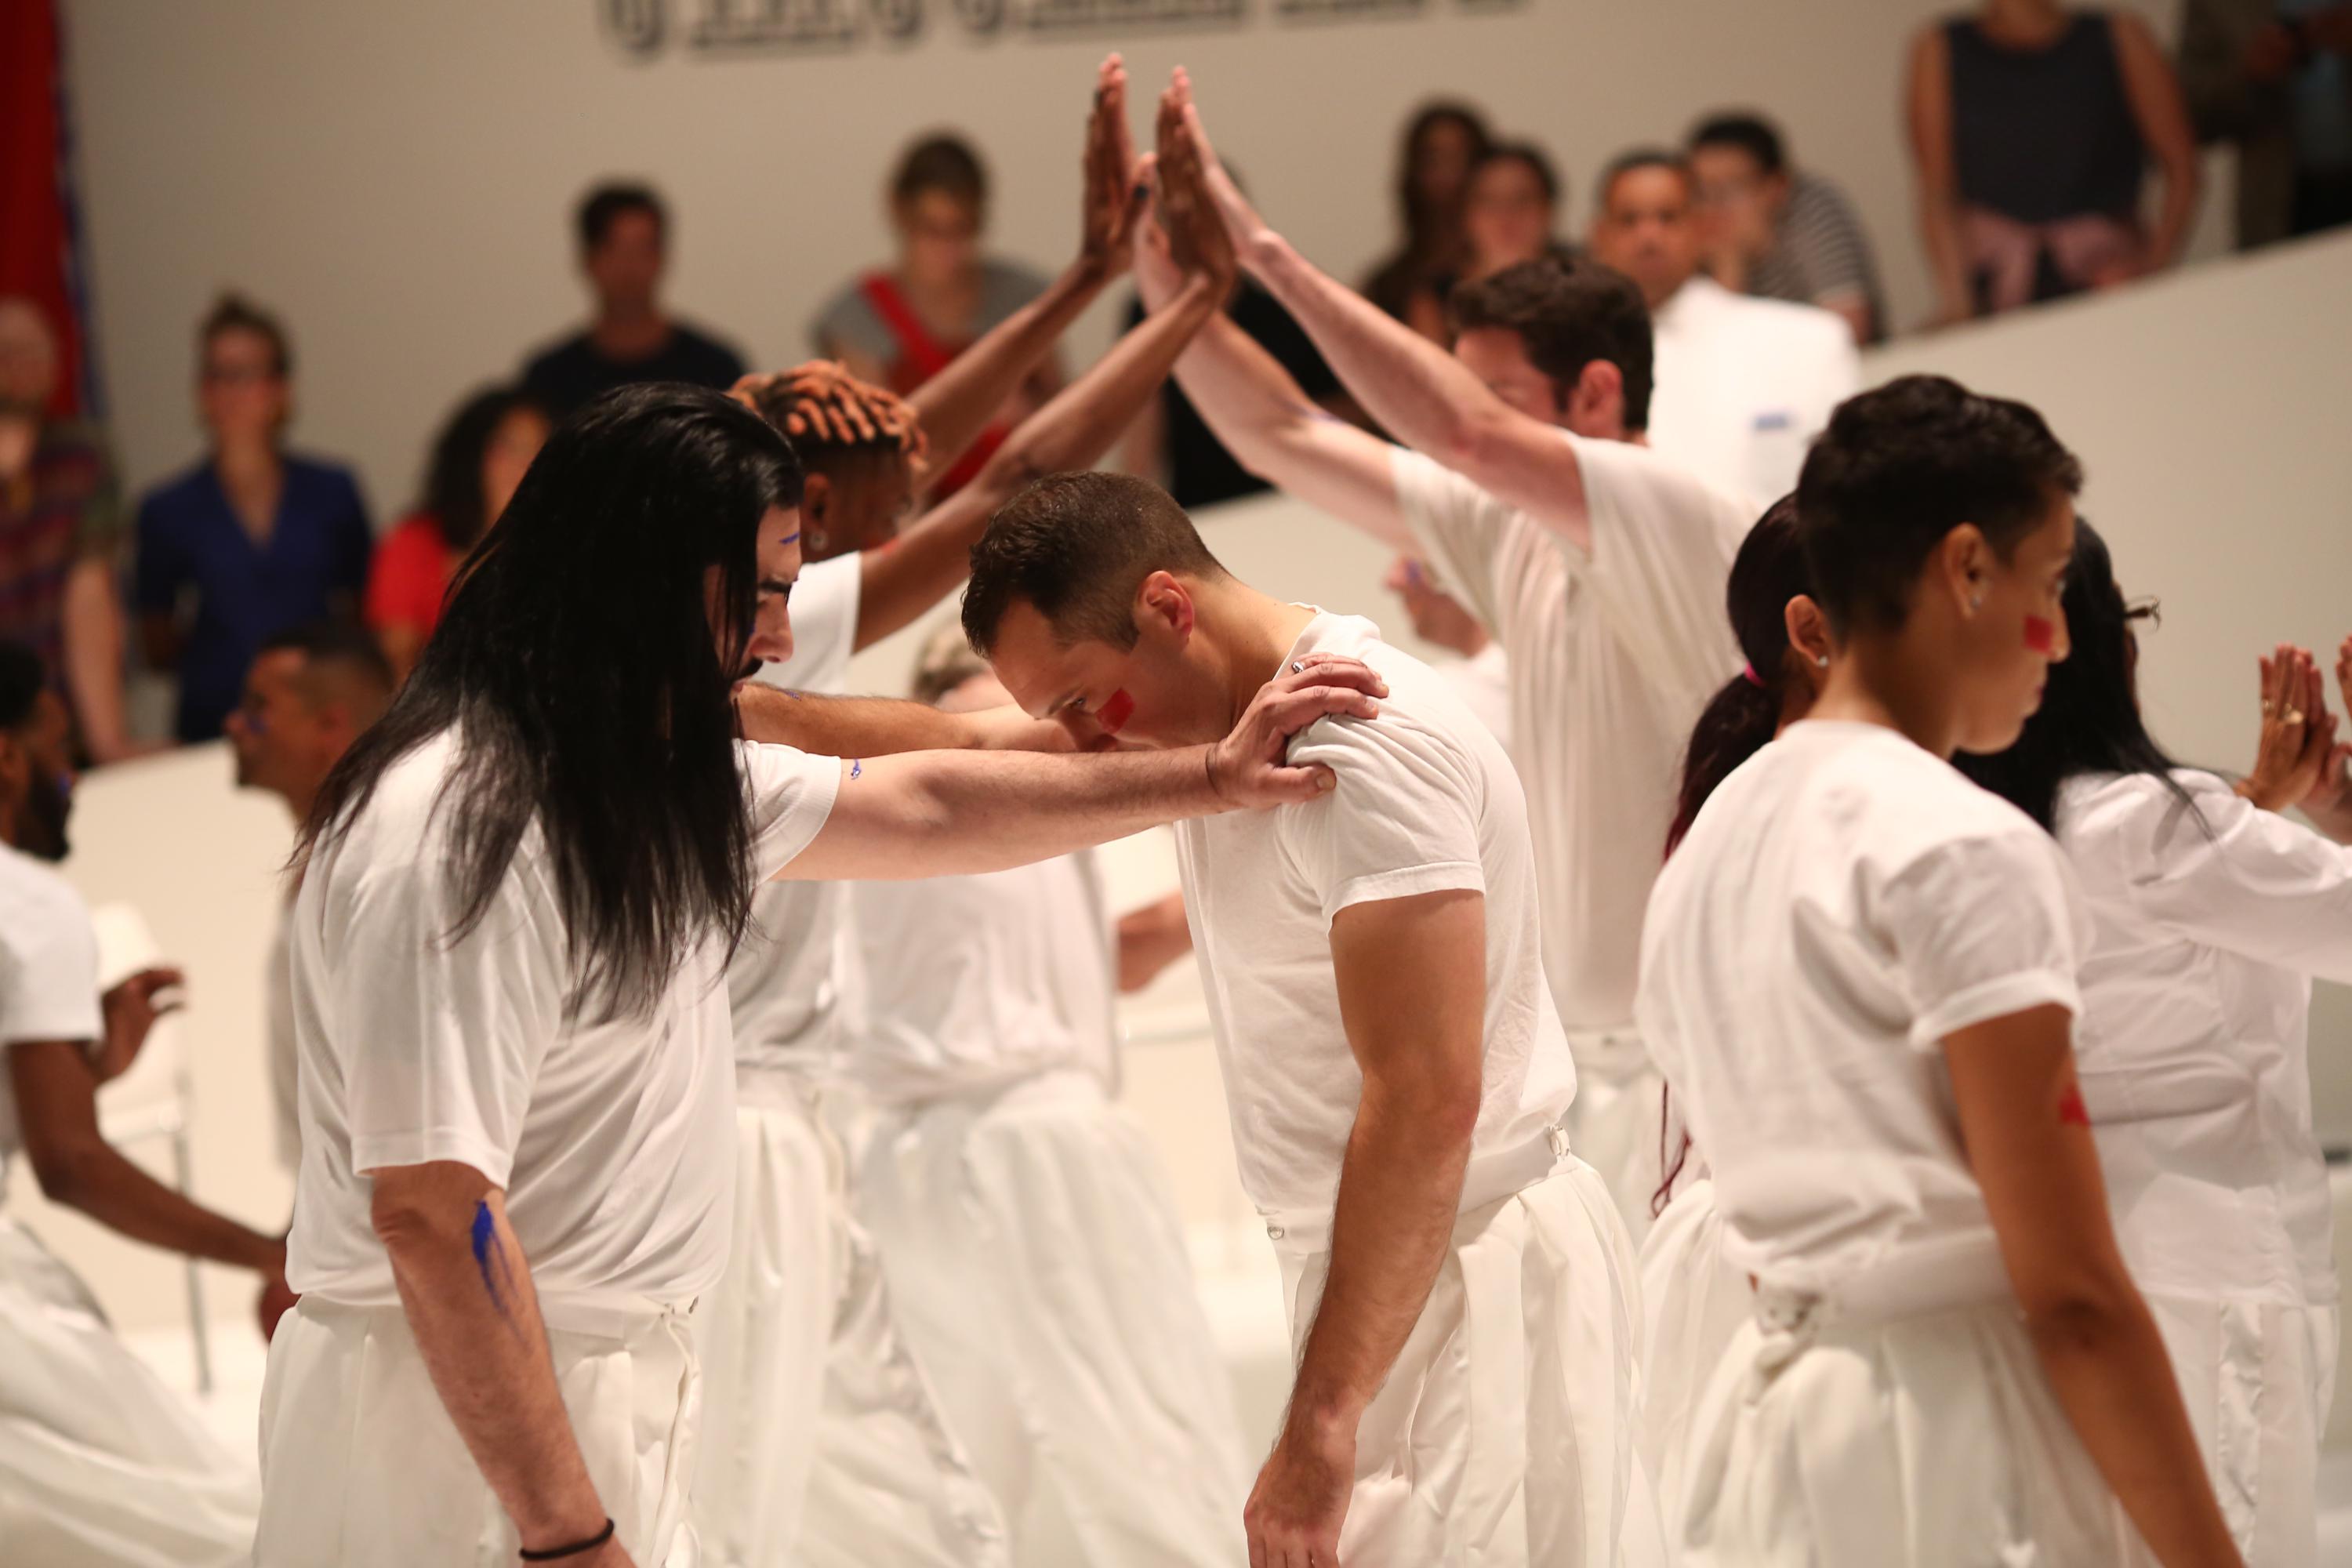 Image of people in white clothing with hands up, creating an arch. Caption:Primitive Games - performance, 1 hr. at Guggenheim Museum, New York, NY, 6/21/18. Photo by Paula Court" 